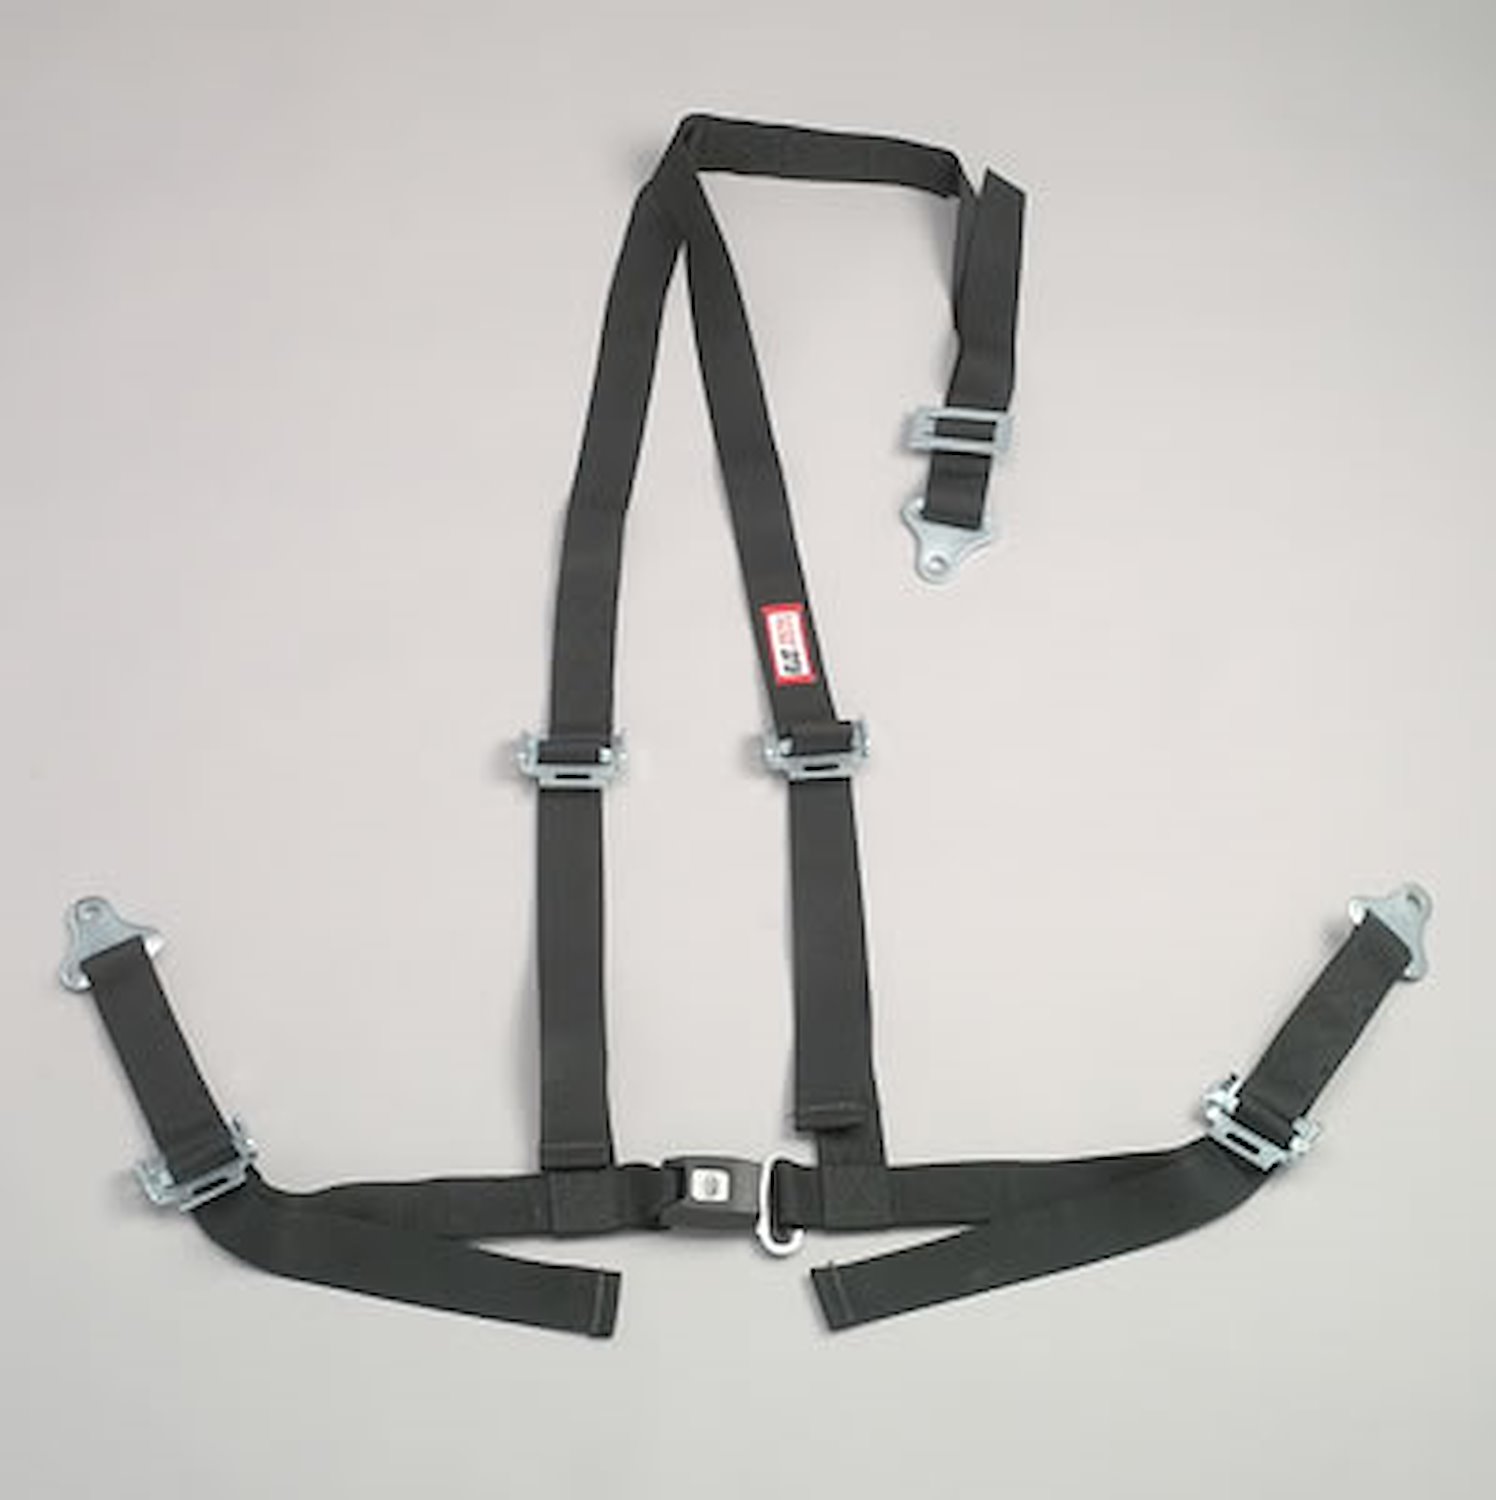 NON-SFI B&T HARNESS 2 PULL UP Lap Belt 2 S. H. Y FLOOR Mount ALL WRAP ENDS w/STERNUM STRAP KHAKI